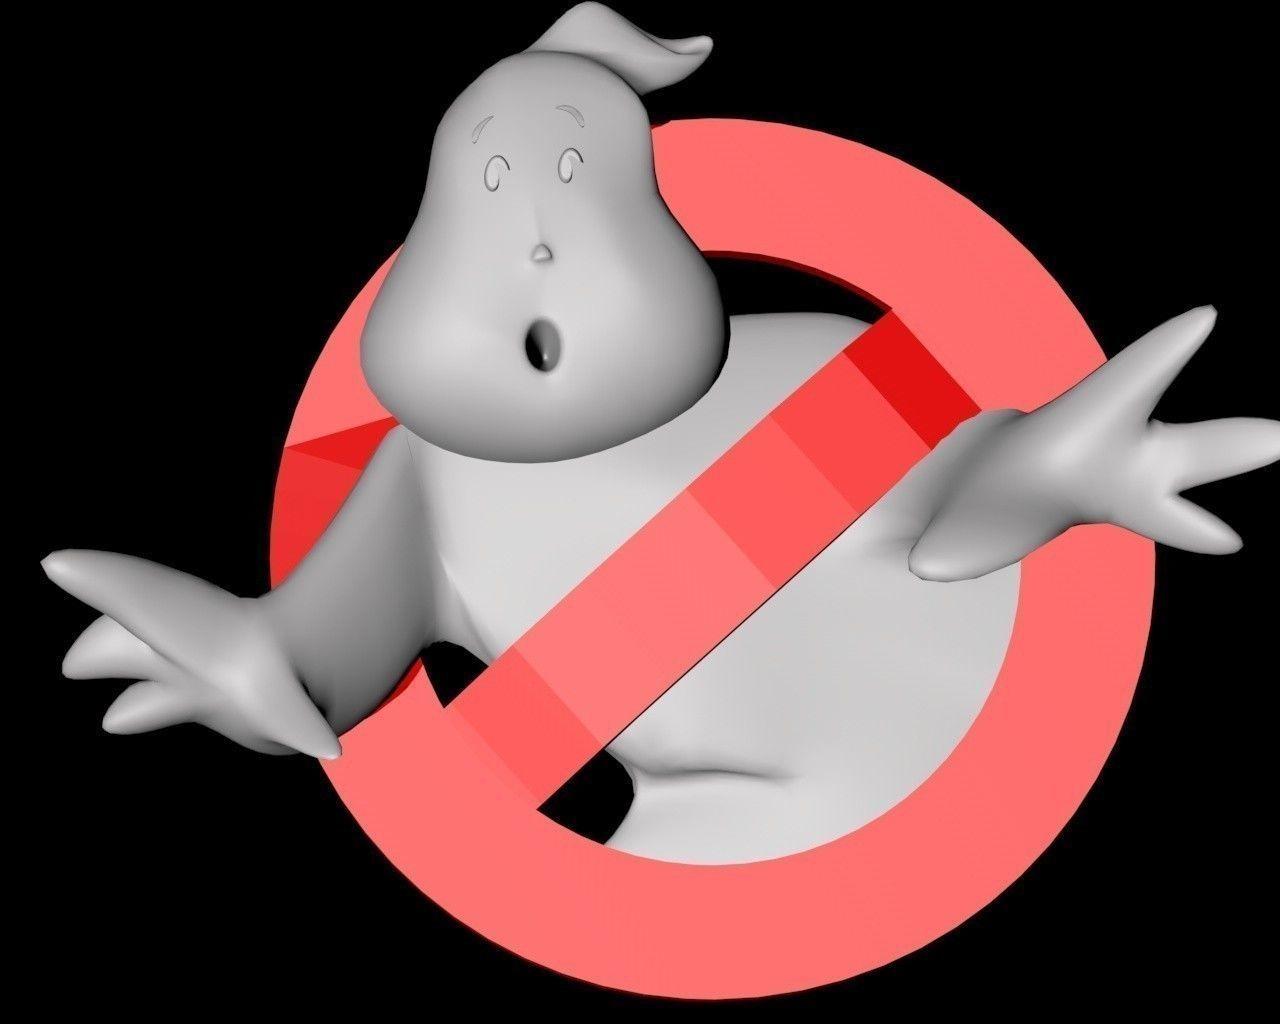 Ghostbusters Logo - GHOSTBUSTERS LOGO 3D | CGTrader